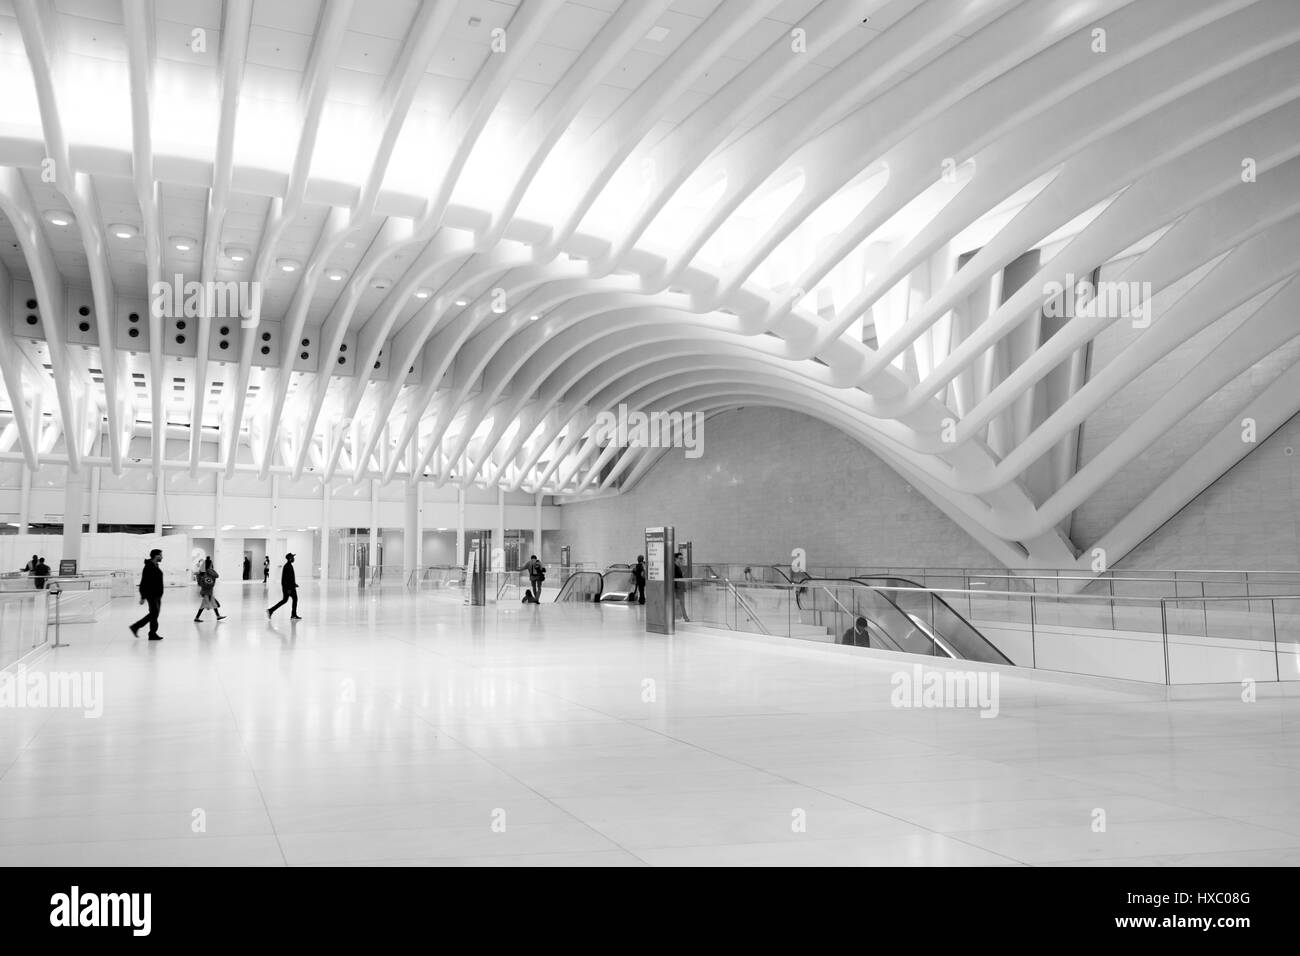 NEW YORK CITY-1 OCTOBER 2016: People walking to the escalator to board the PATH train to New Jersey inside Santiago Calatrava's Oculus,stunning new tr Stock Photo